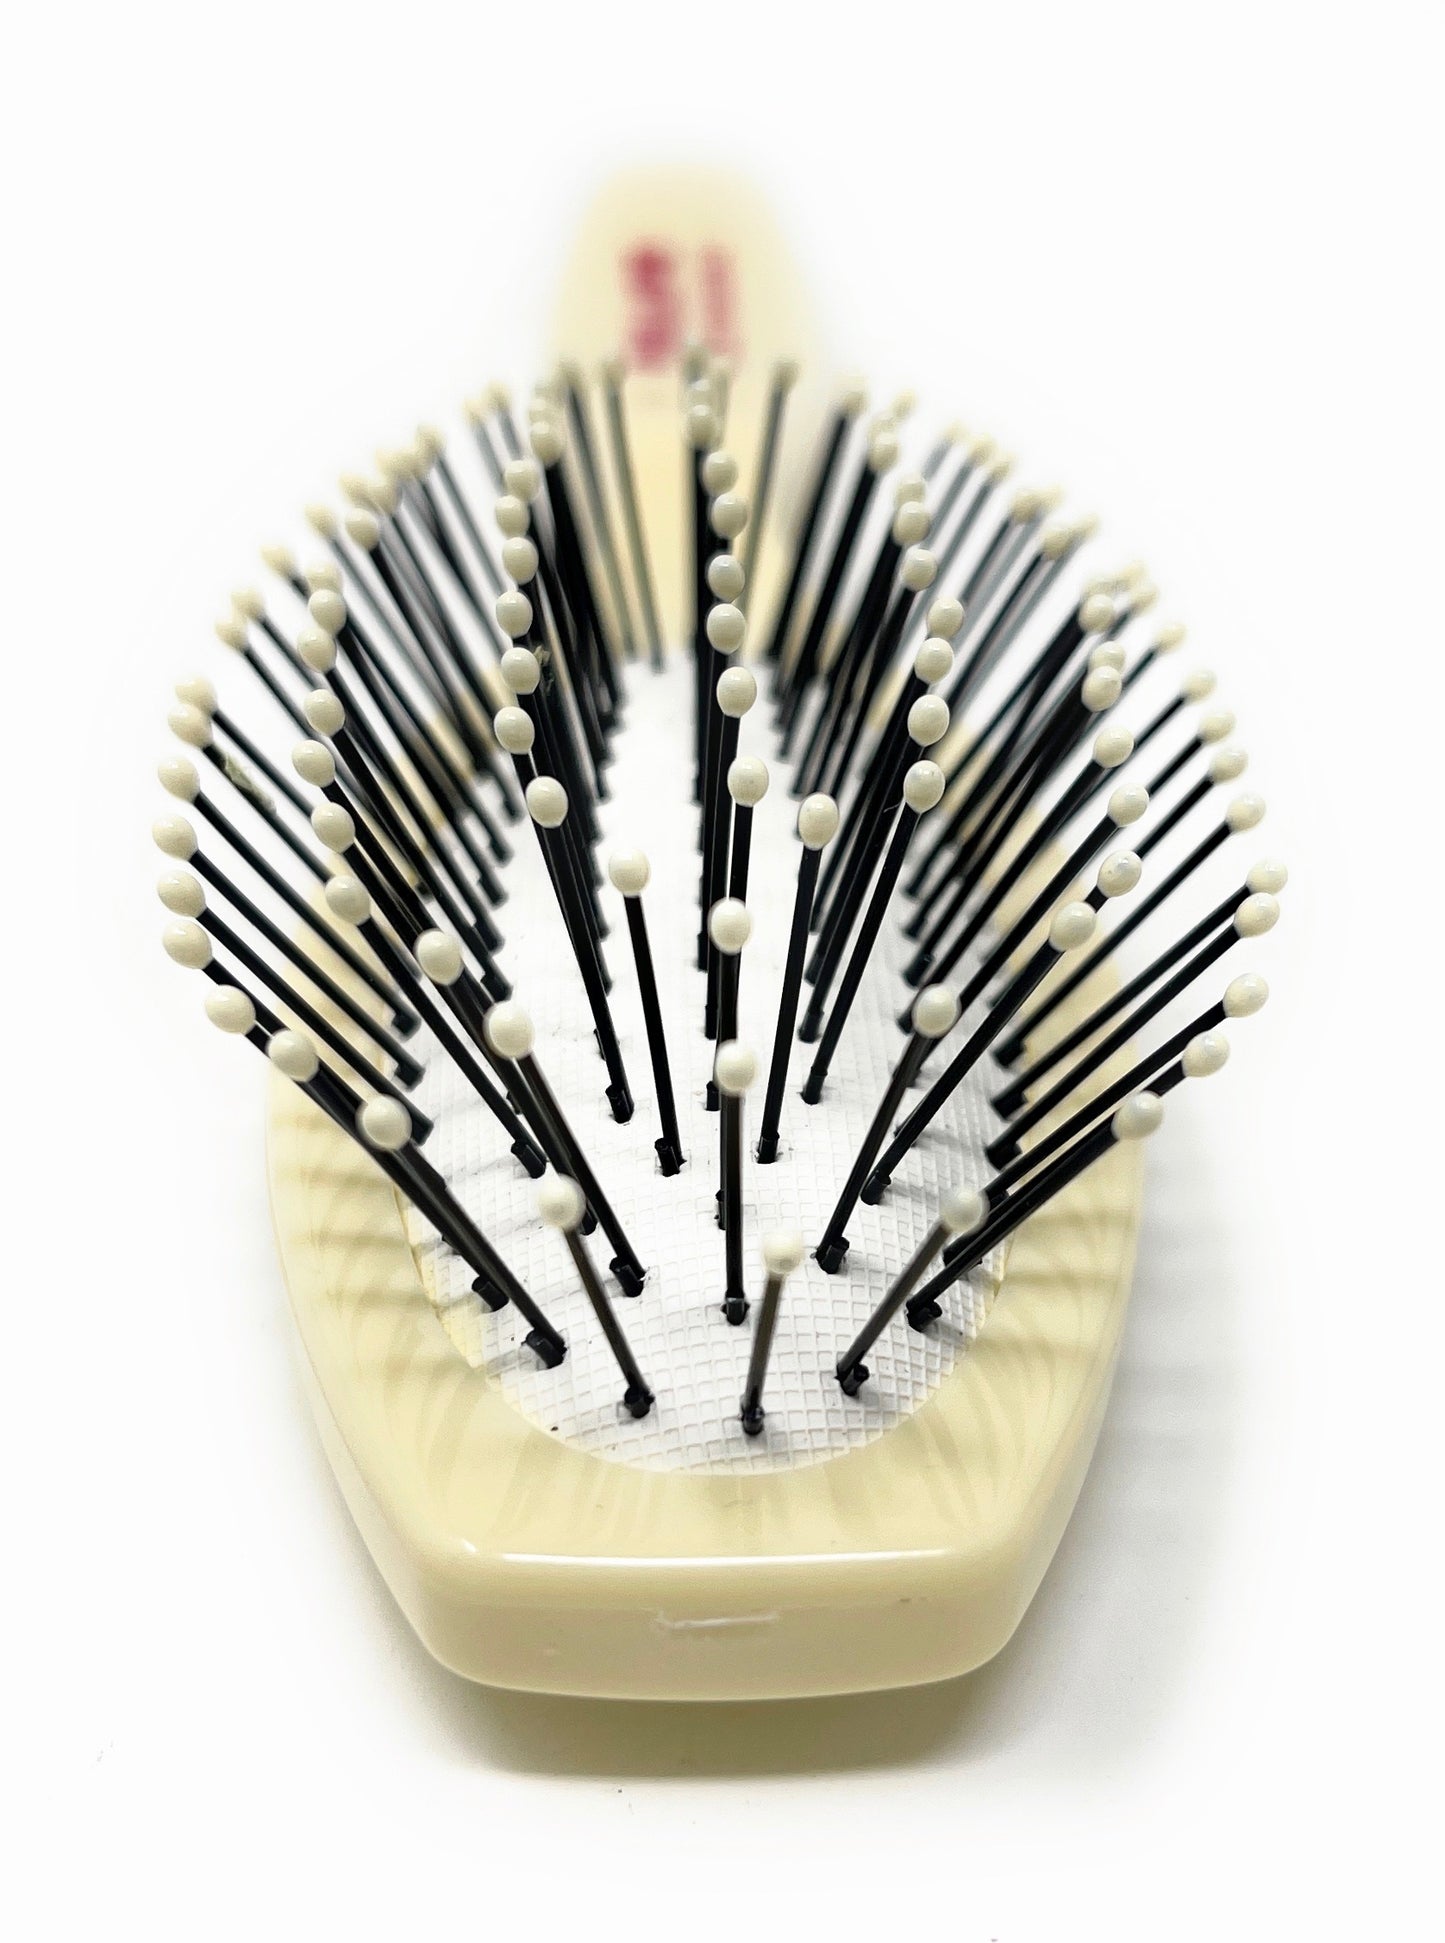 Phillips Brush Light Touch 2 Oval Cushioned Brush Purse Size 7 Rows Bristles Color Ivory